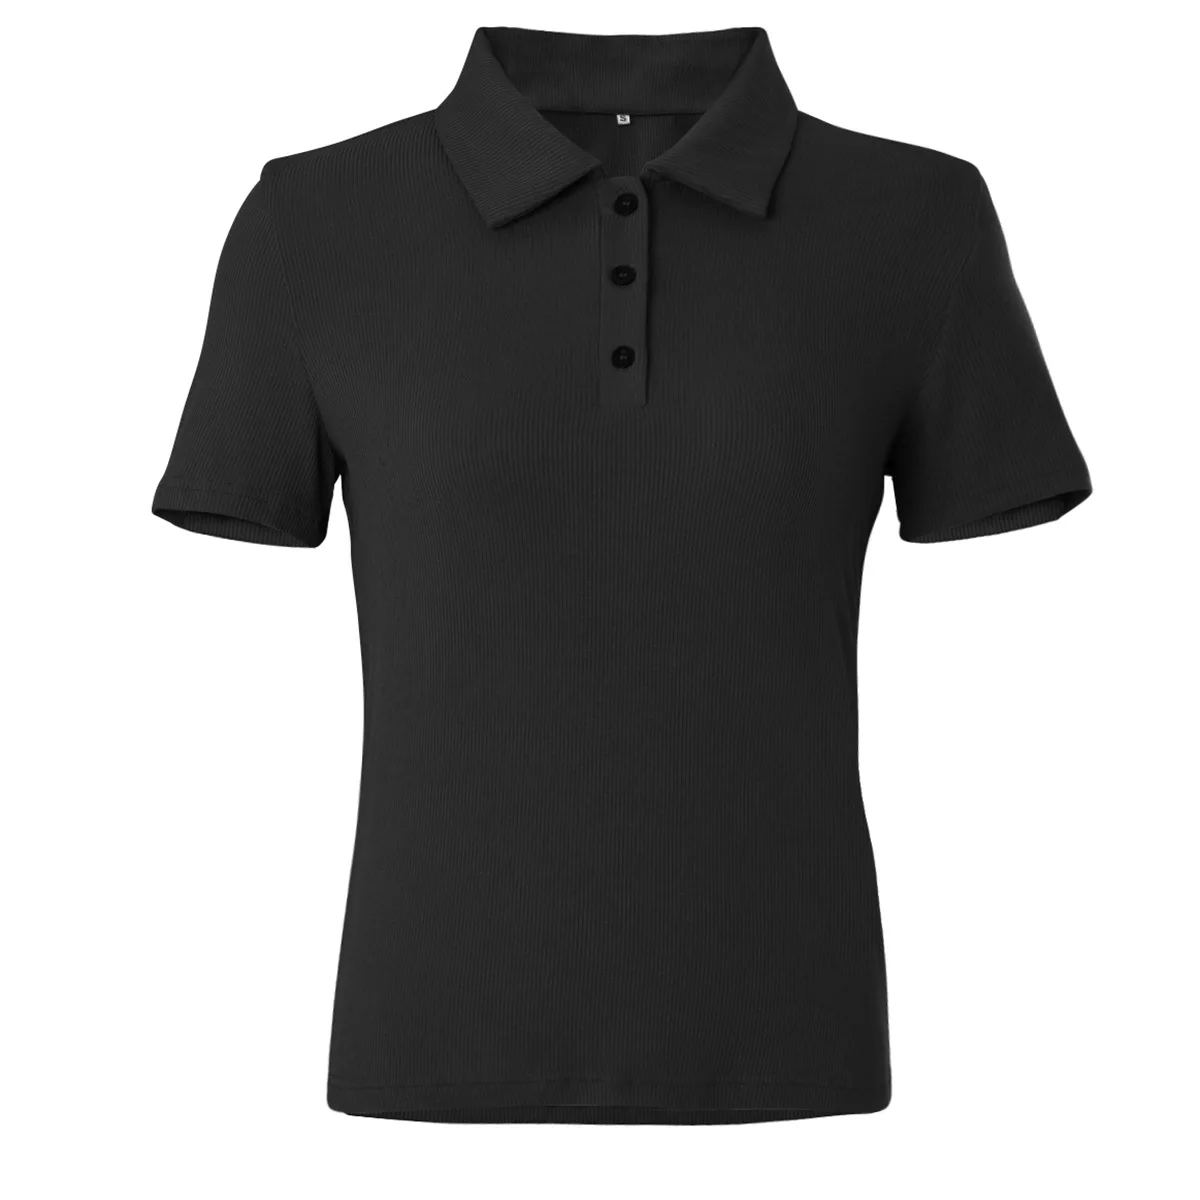 Hot sale women's polo shirts knitted rib short sleeve button down slim fit comfortable polo shirt for women